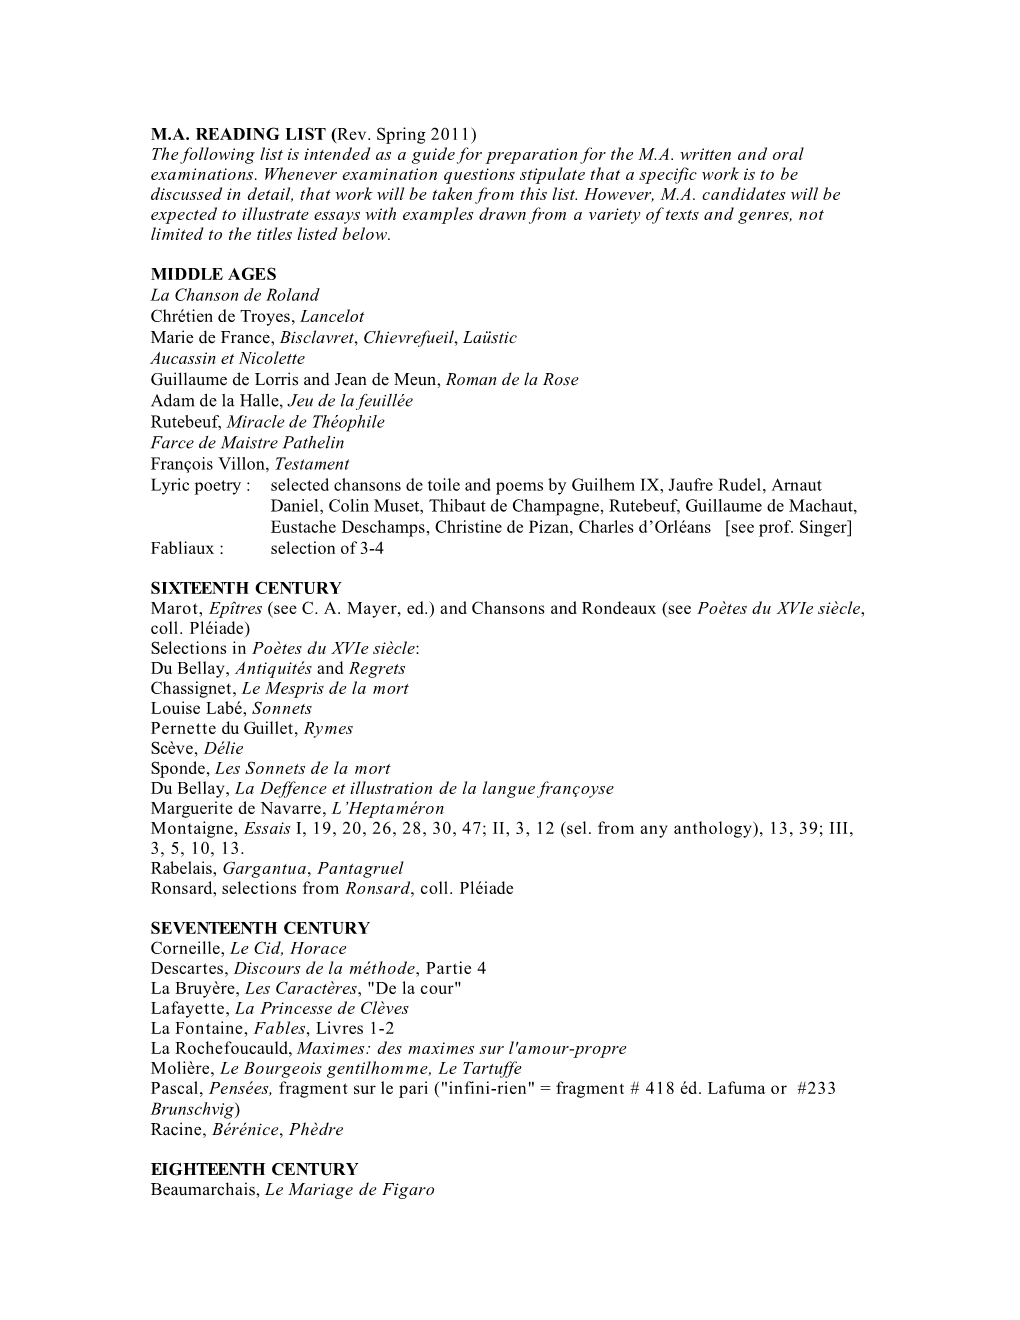 M.A. READING LIST (Rev. Spring 2011) the Following List Is Intended As a Guide for Preparation for the M.A